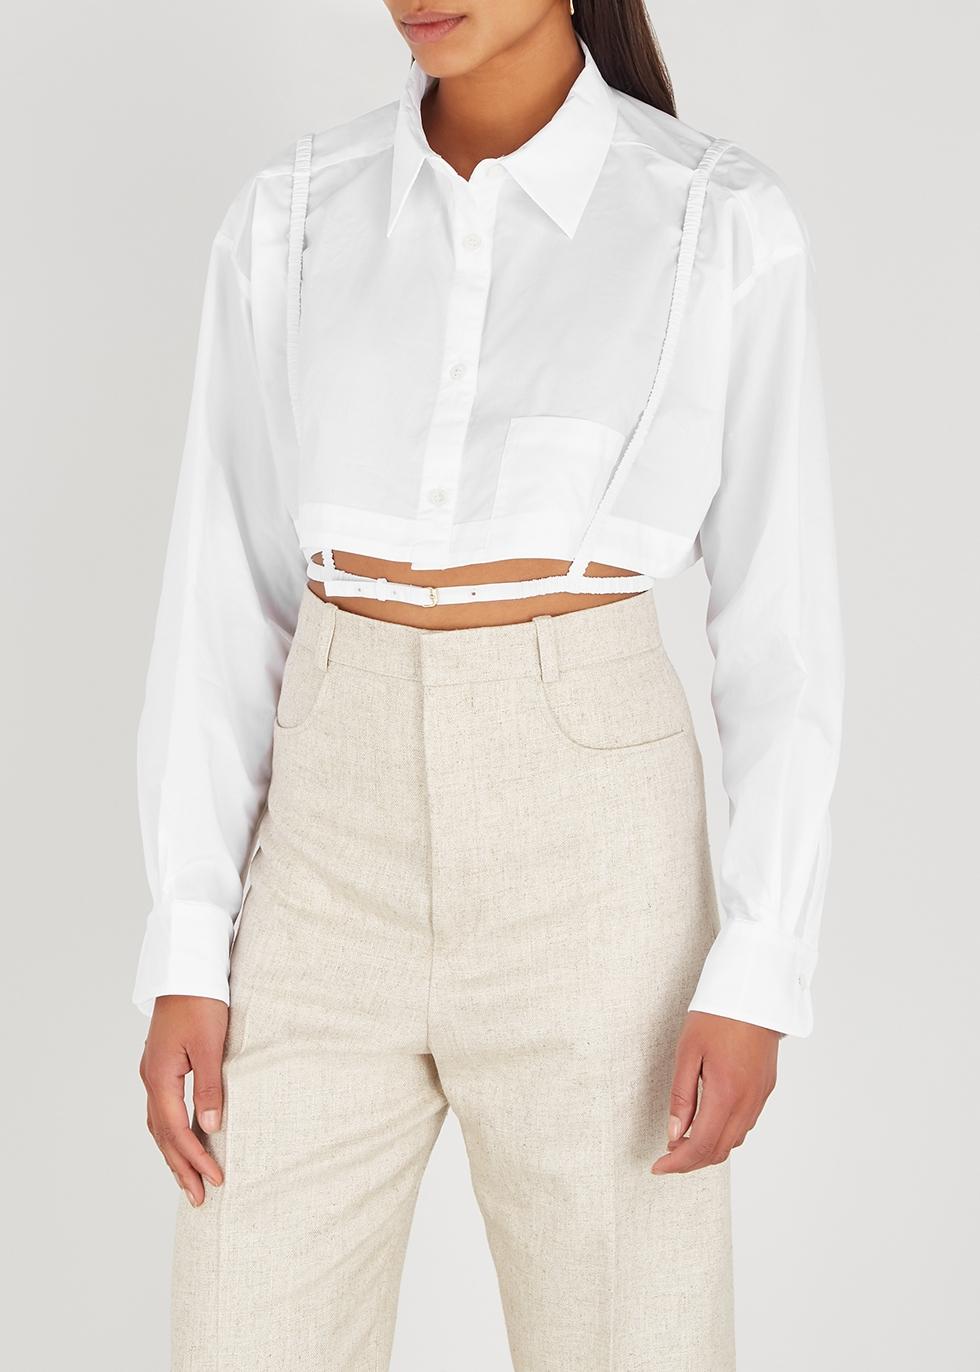 Jacquemus La Chemise Cavaou Cropped Cotton Shirt in White | Lyst